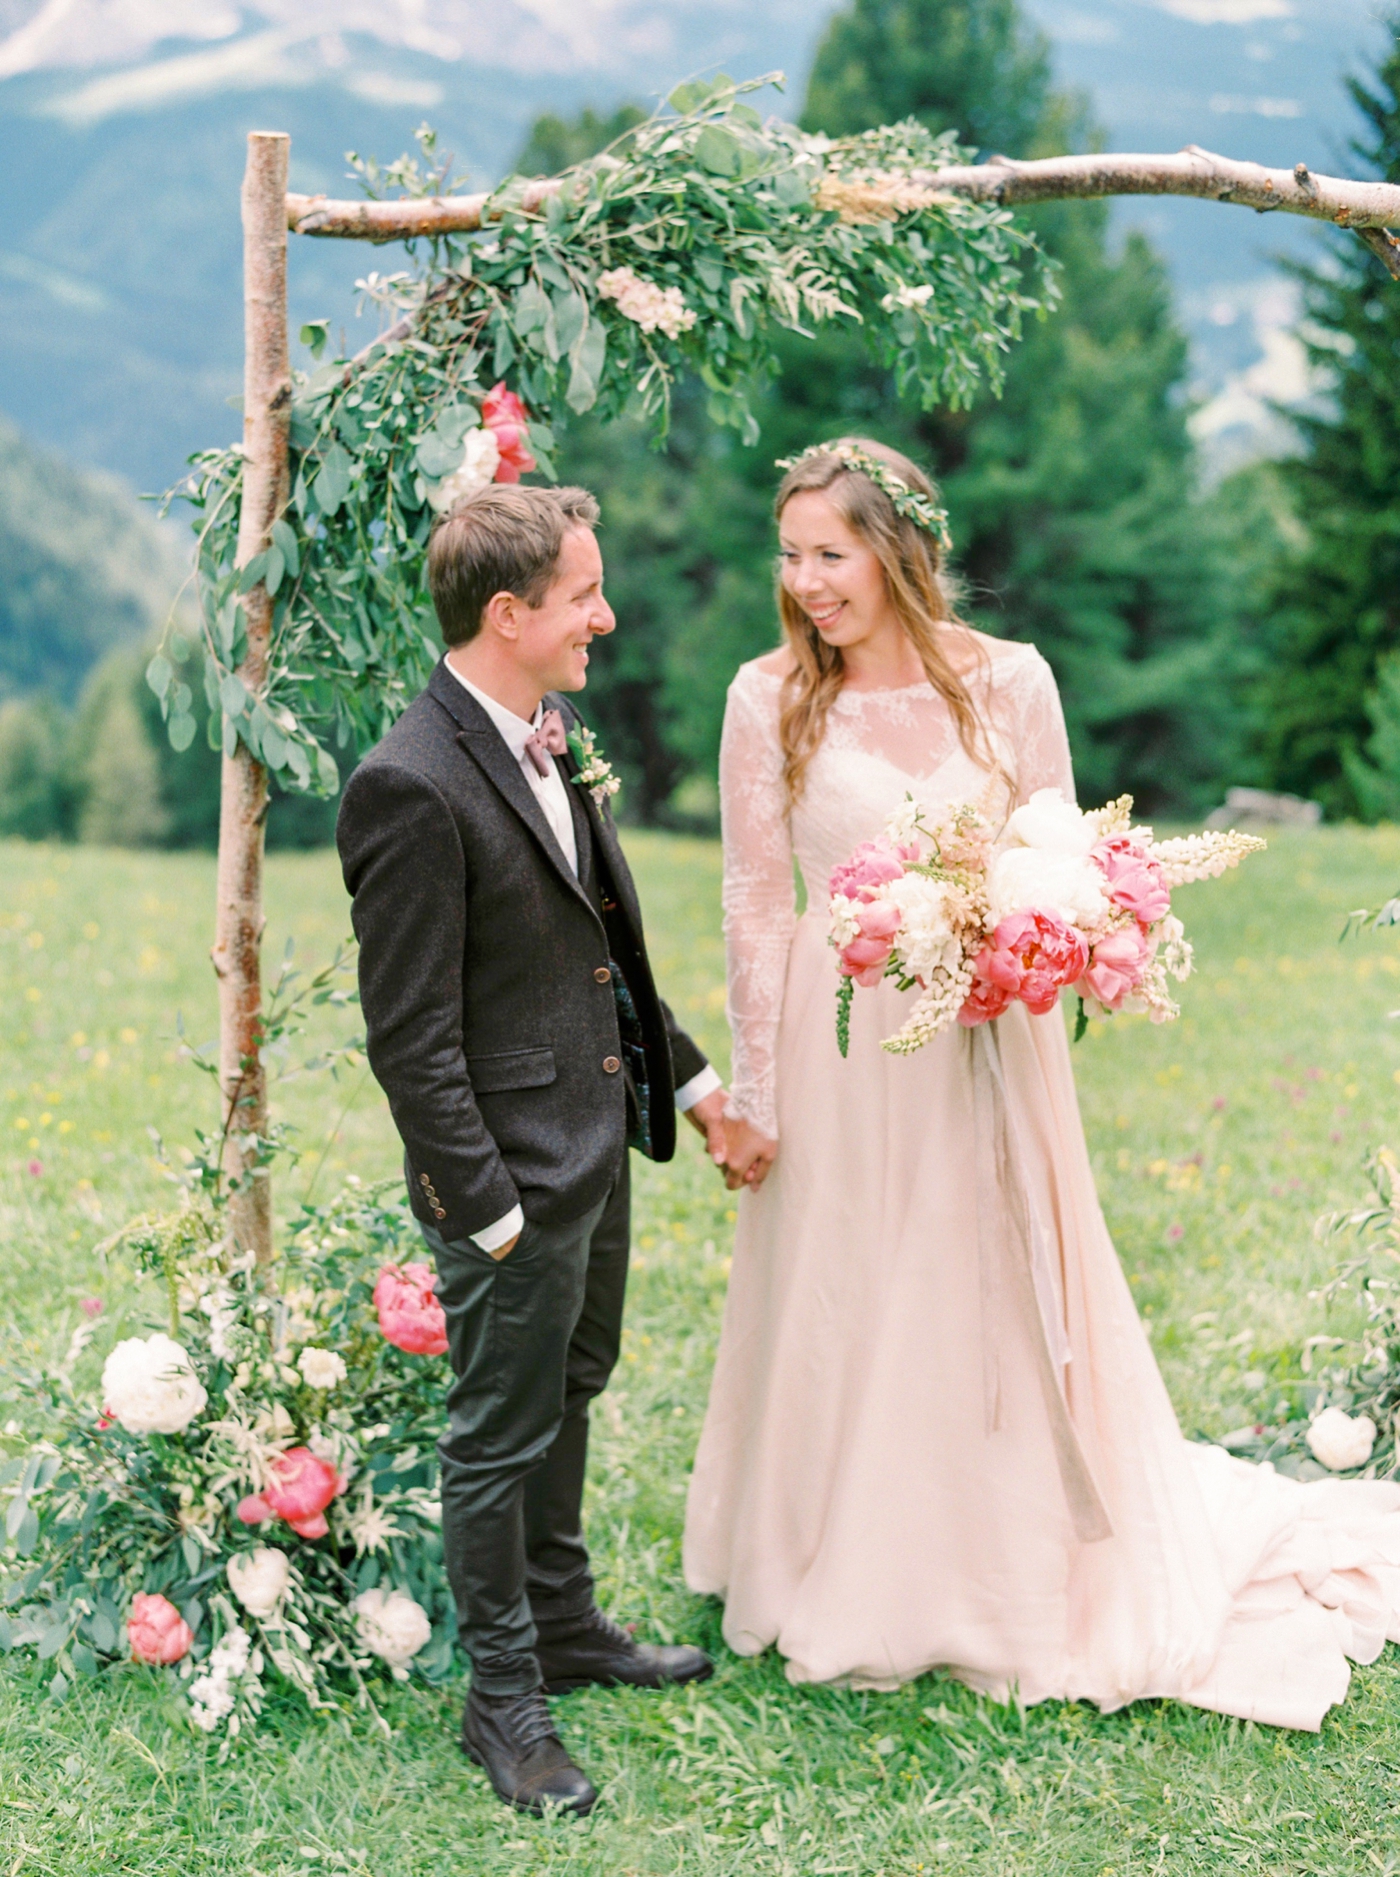 Italy wedding photographers | Dolomites mountain top wedding | pink and white peony bouquet | long sleeve flowing wedding dress | outdoor wedding ceremony ski chalet wedding floral arch | justine m...